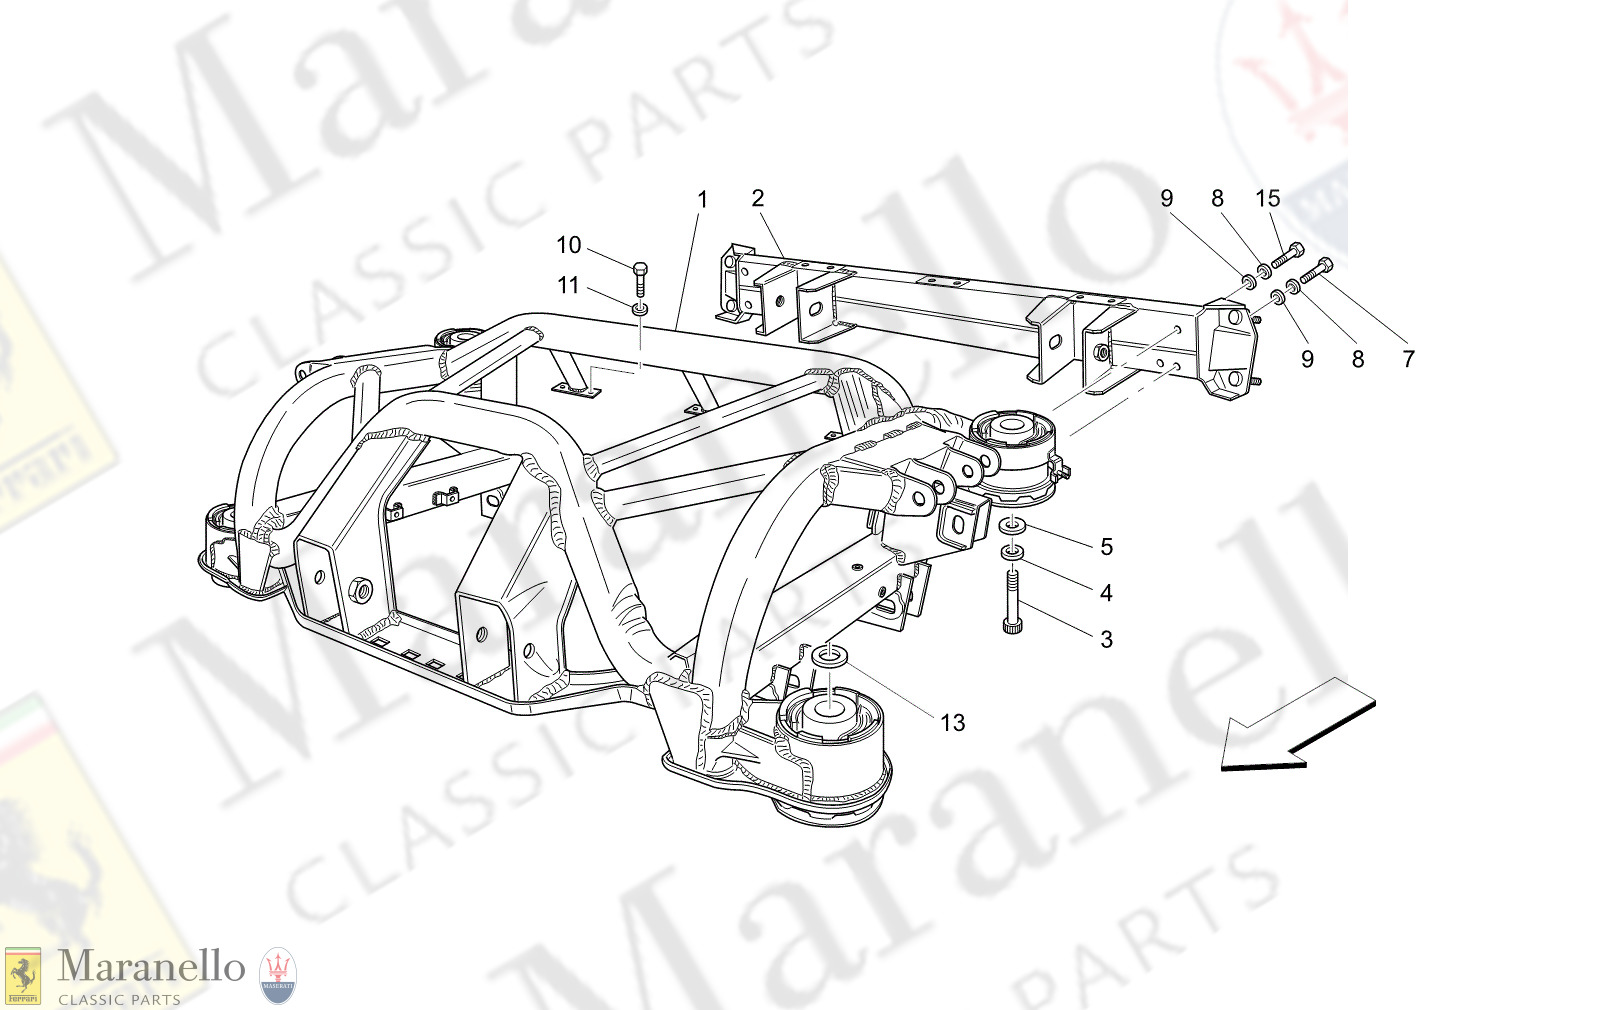 06.22 - 14 - 0622 - 14 Rear Chassis